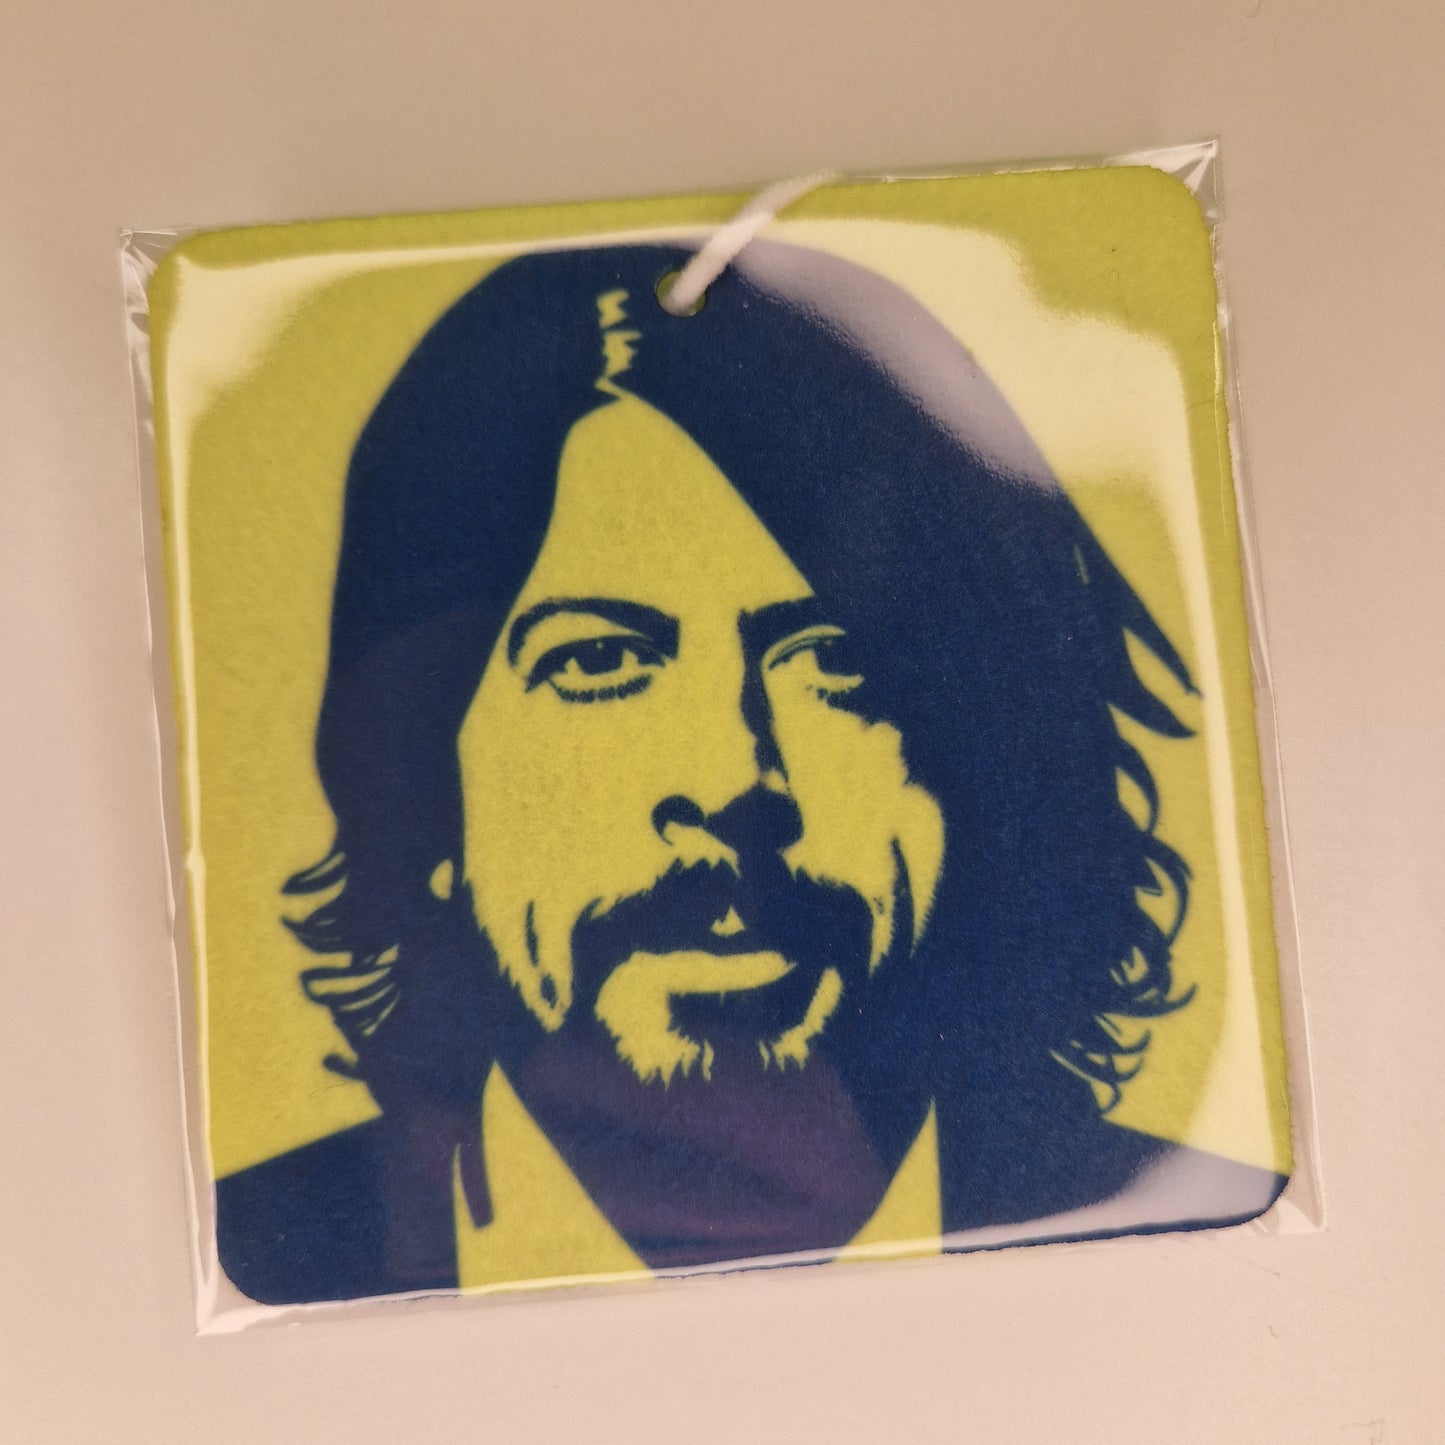 foo fighters gifts car air freshener - dave grohl